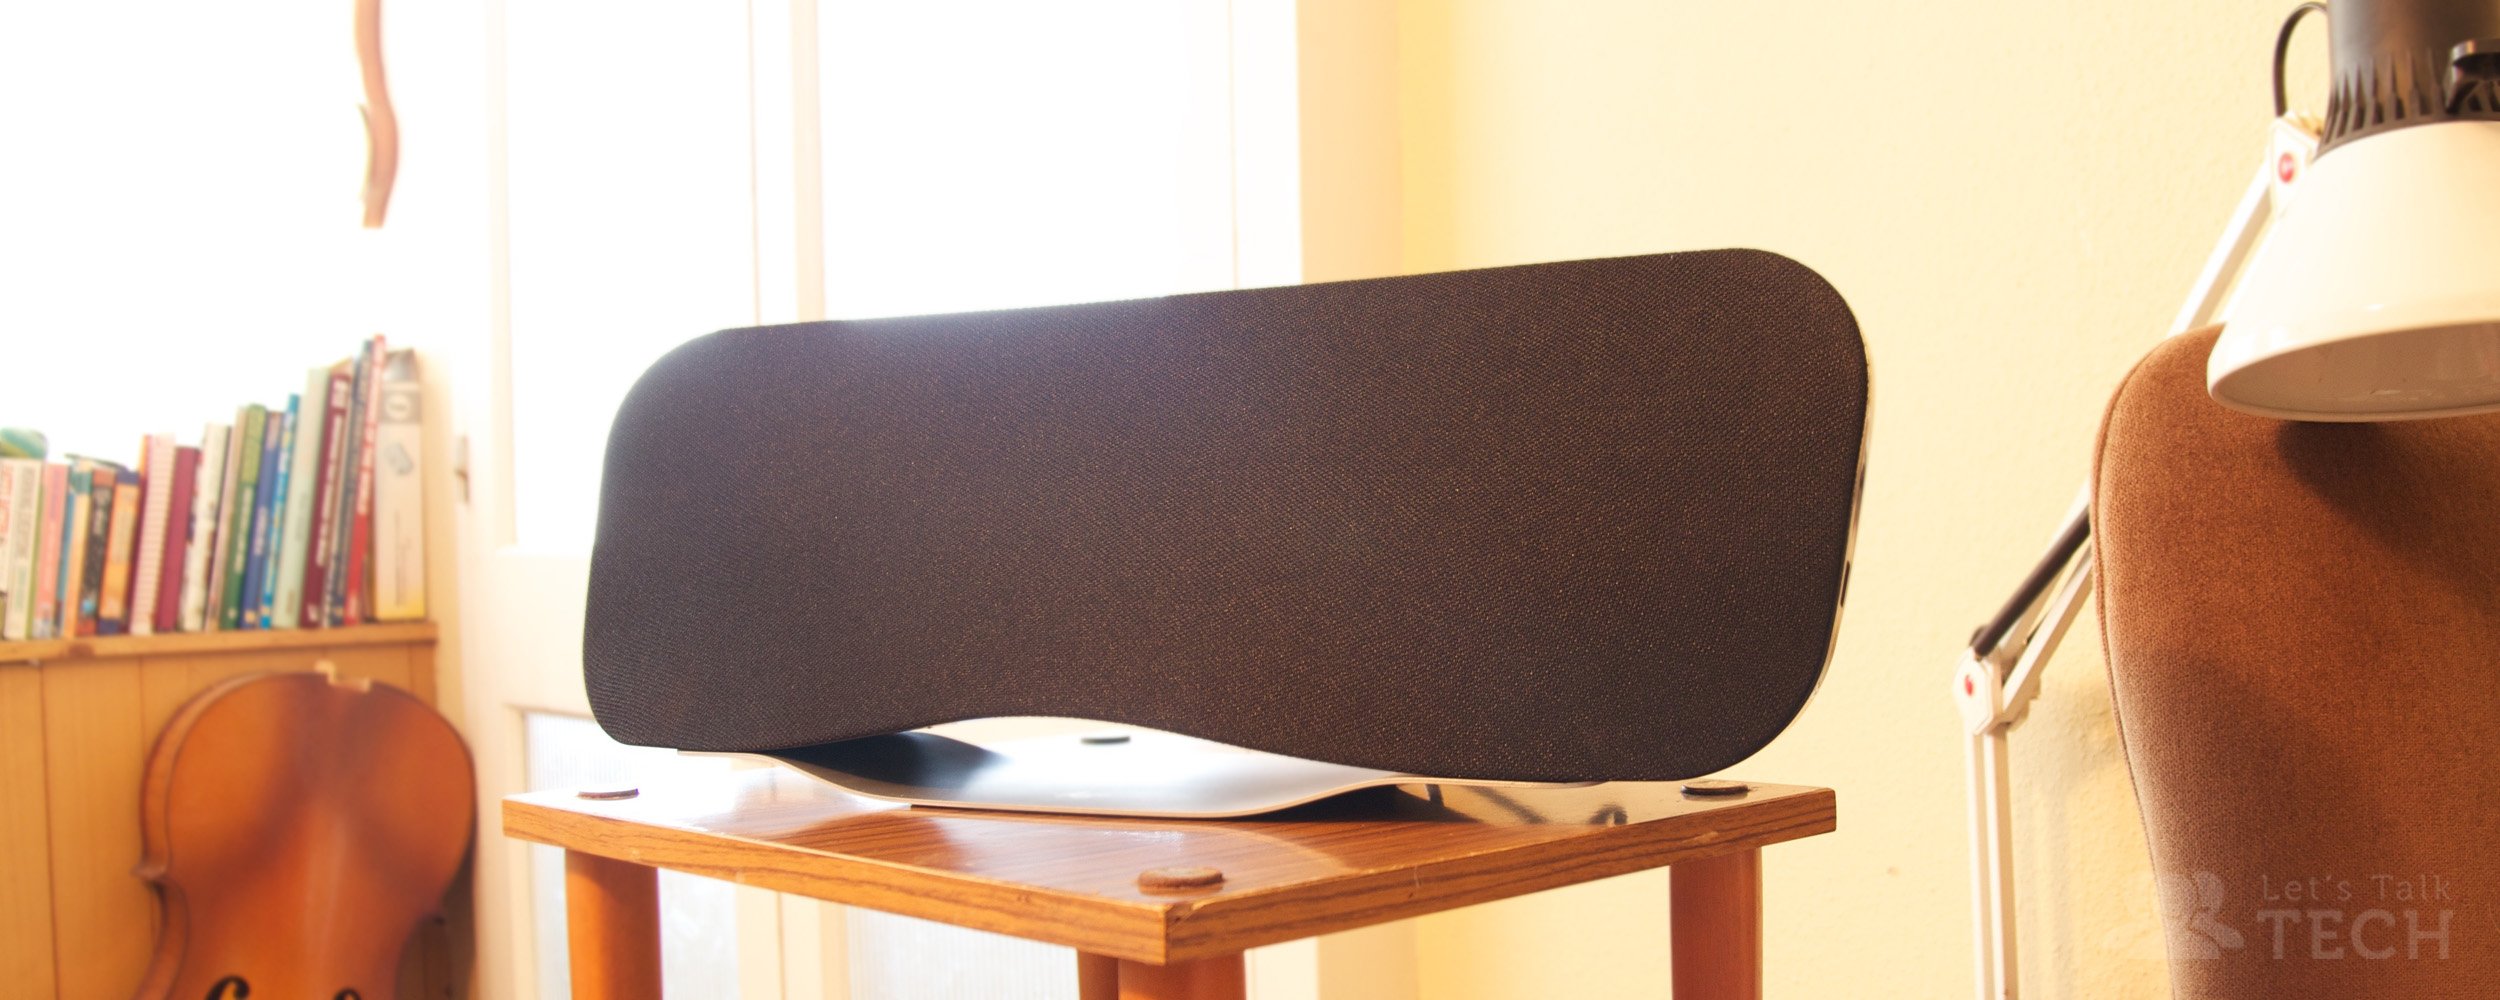 Kitsound Cayman Wireless 2.1 Speaker Review: A Mixed Bag